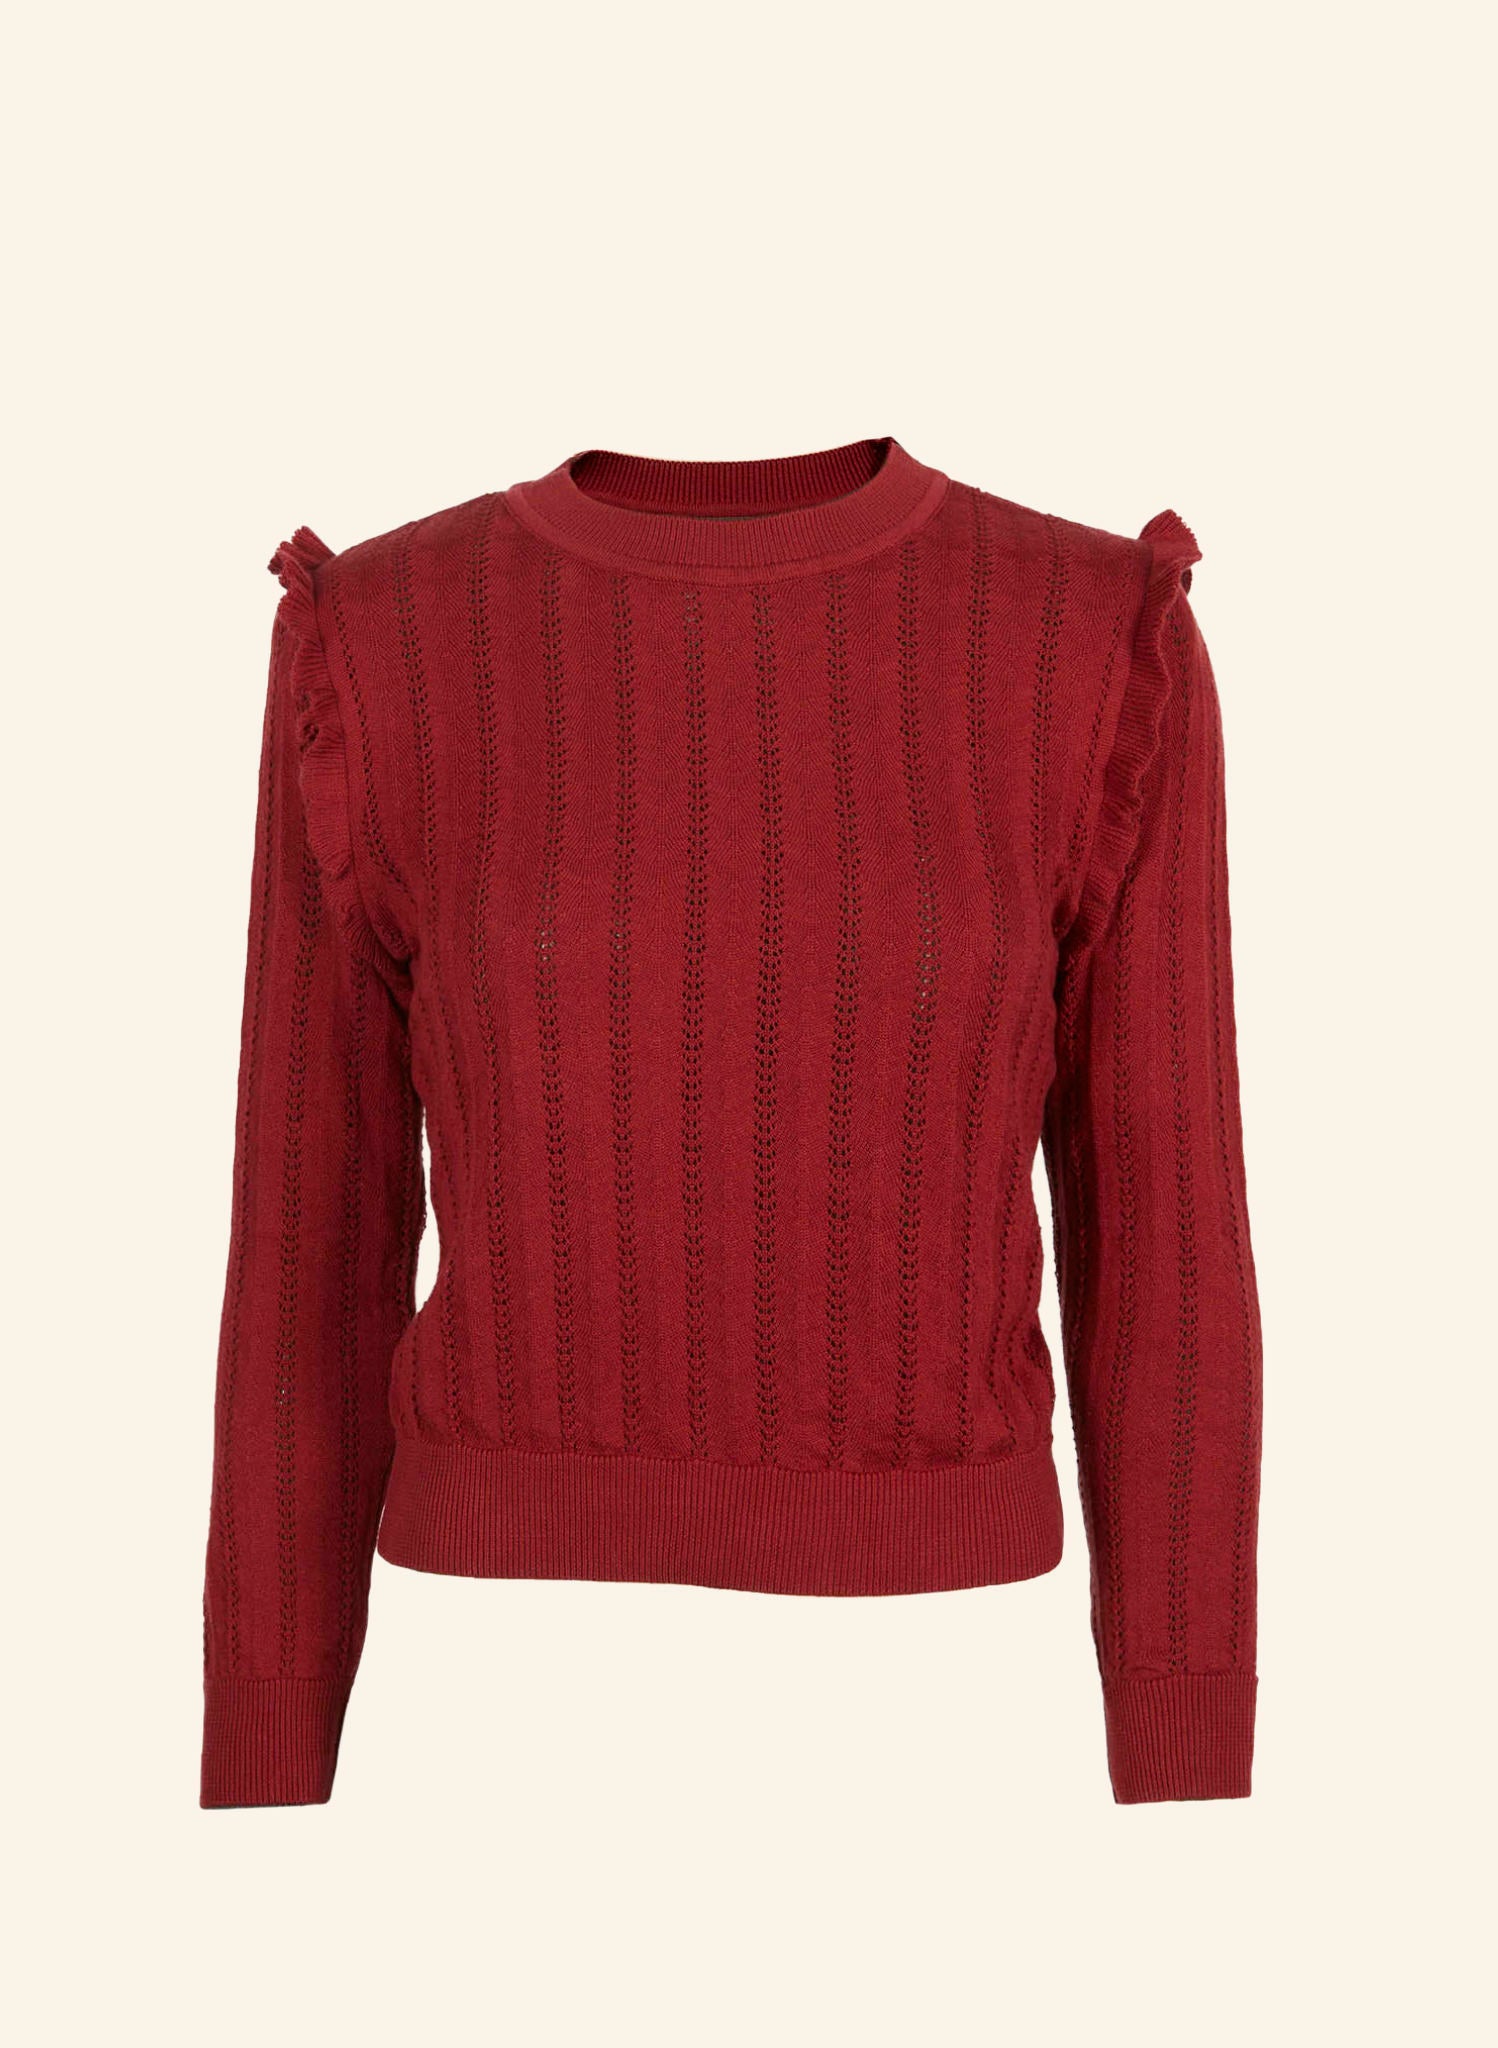 Diana - Red Ruffle Knitted Top